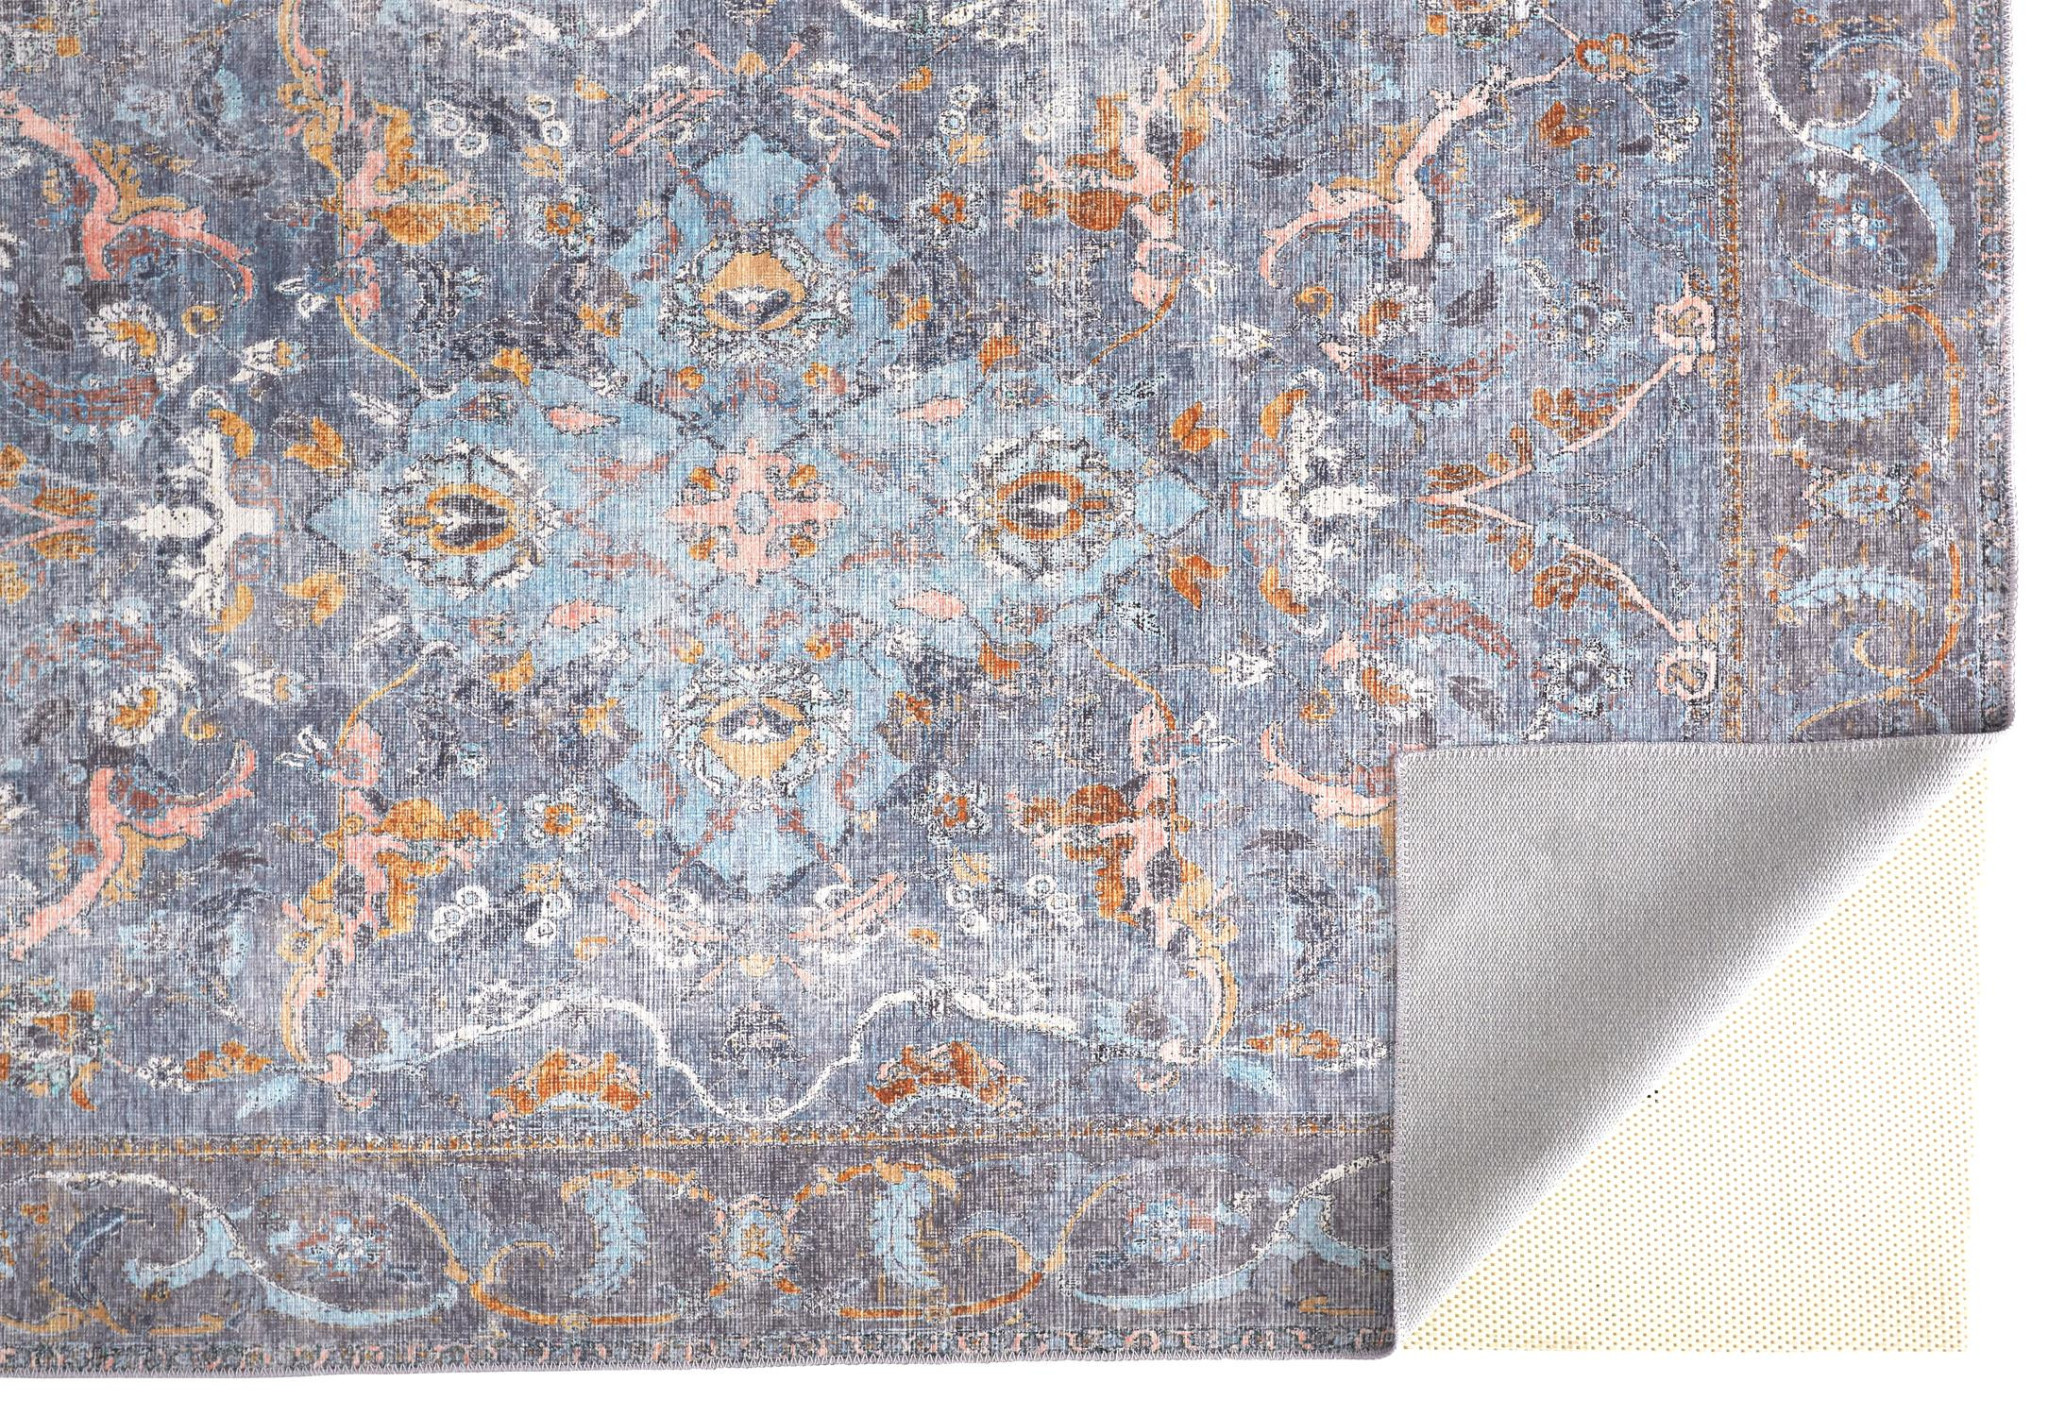 8' X 10' Blue Gray And Orange Floral Area Rug-515053-1